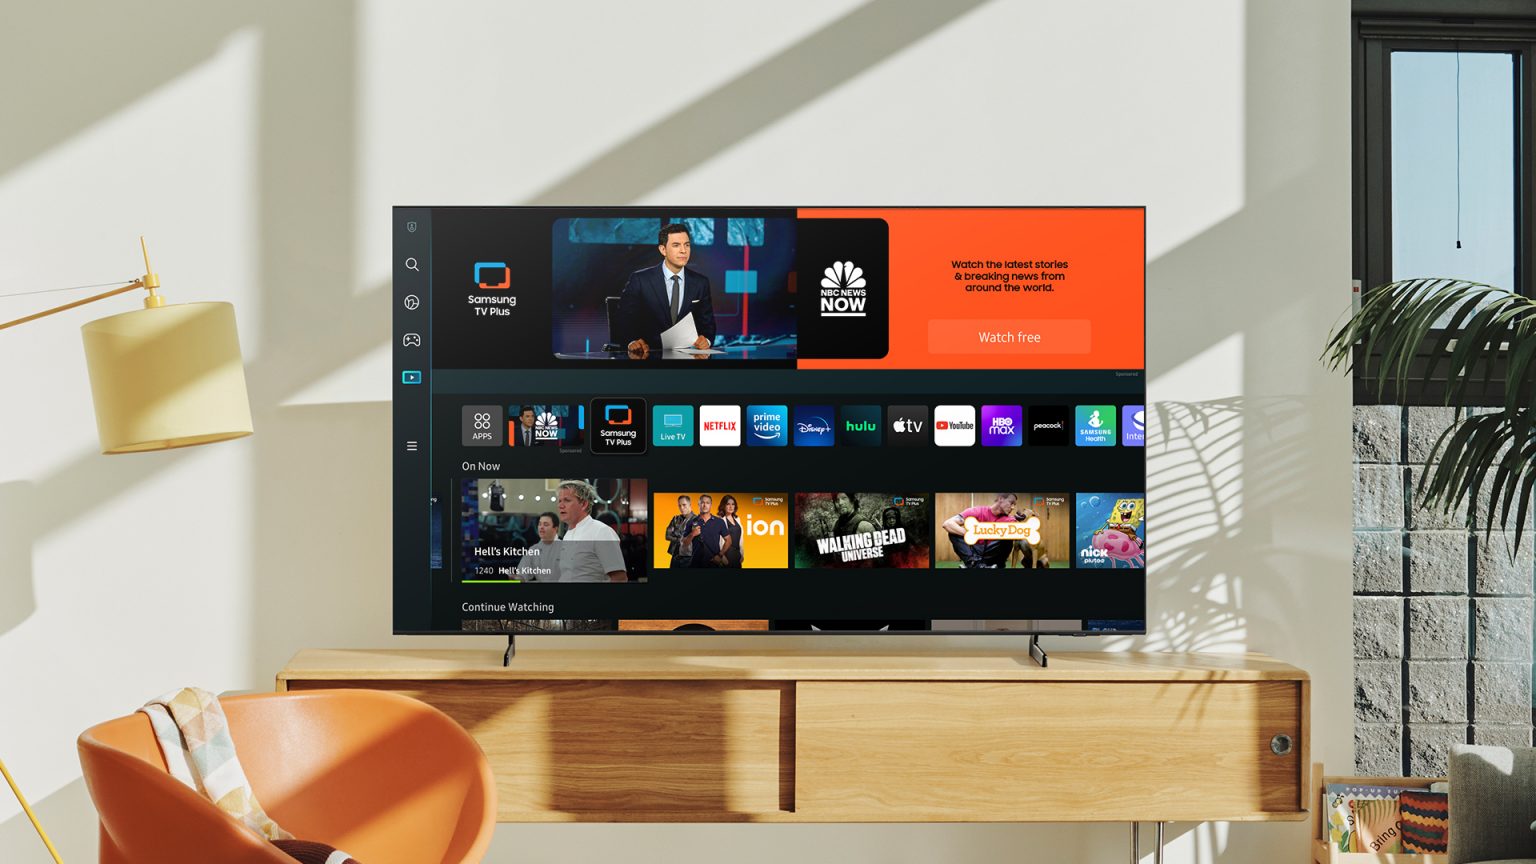 Samsung smart TVs could soon get updated YouTube app with cleaner look